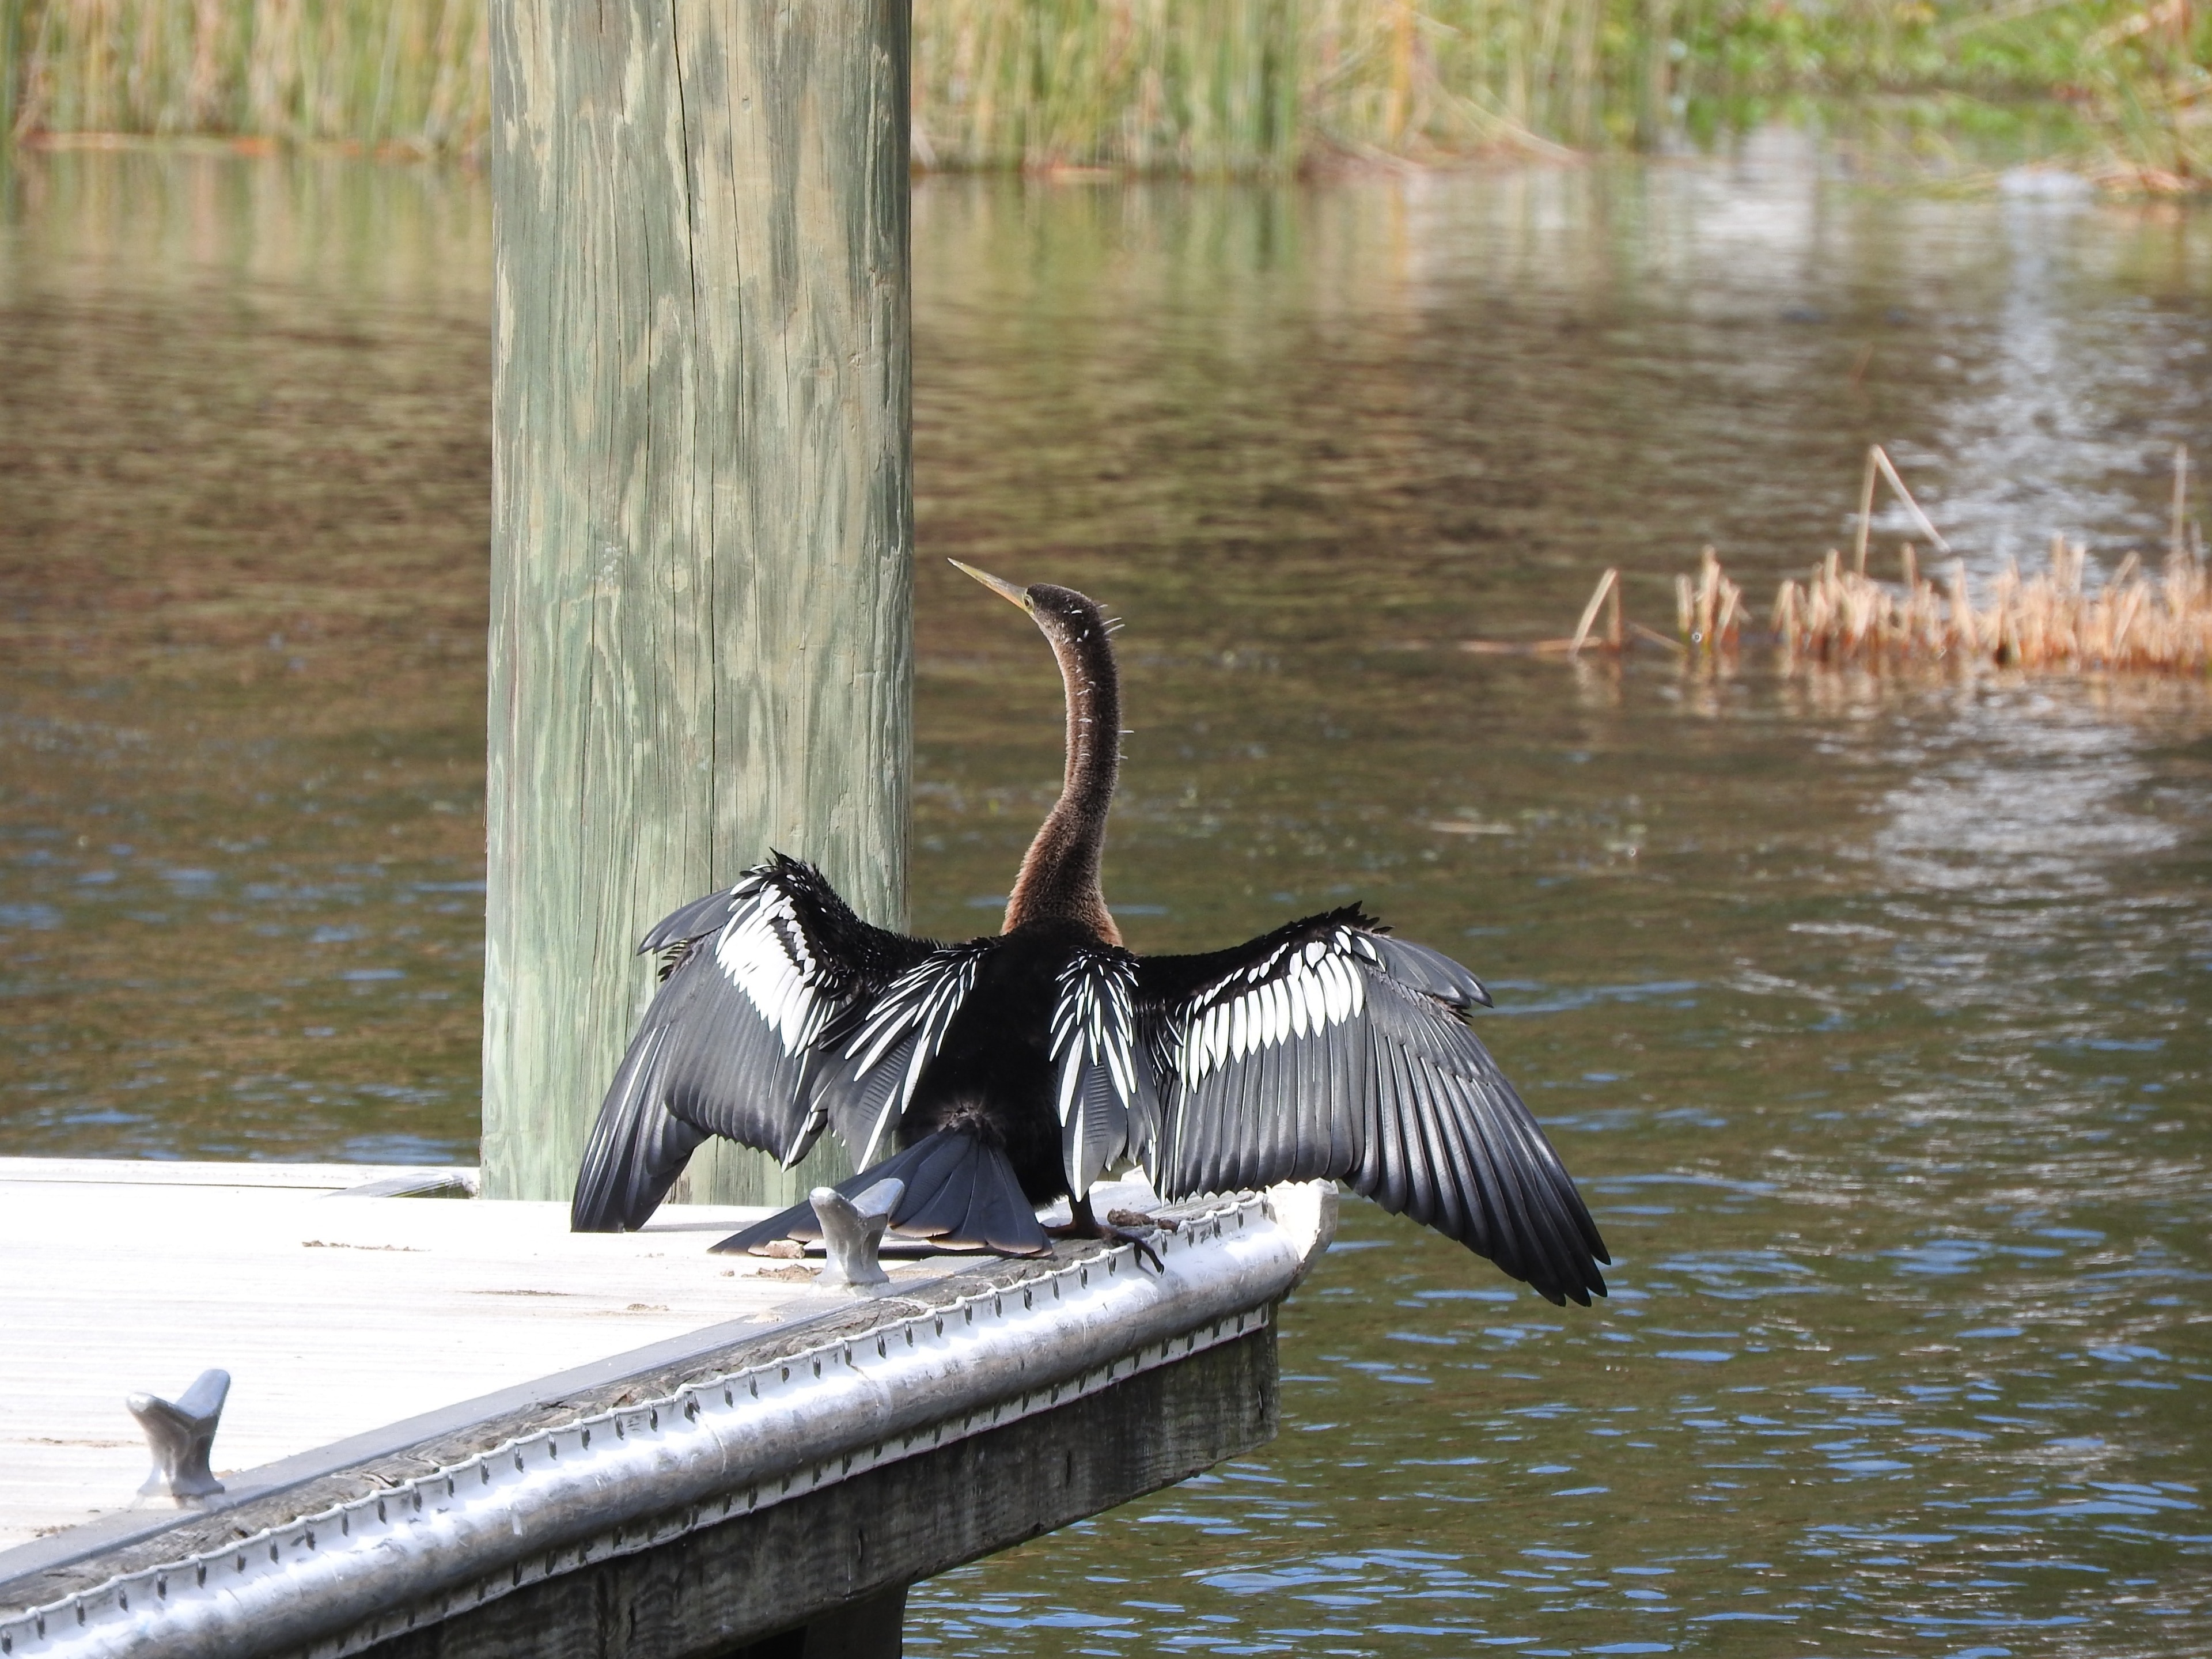 The anhinga (/ænˈhɪŋɡə/; Anhinga anhinga), sometimes called snakebird, darter, American darter, or water turkey, is a water bird of the warmer parts of the Americas. The word anhinga comes from the Brazilian Tupi language and means devil bird or snake bird. The origin of the name snakebird is apparent when swimming: only the colored neck appears above water so the bird looks like a snake ready to strike. They do not have external nares (nostrils) and breathe solely through their epiglottis. (Wiki) November 2018

#Nature